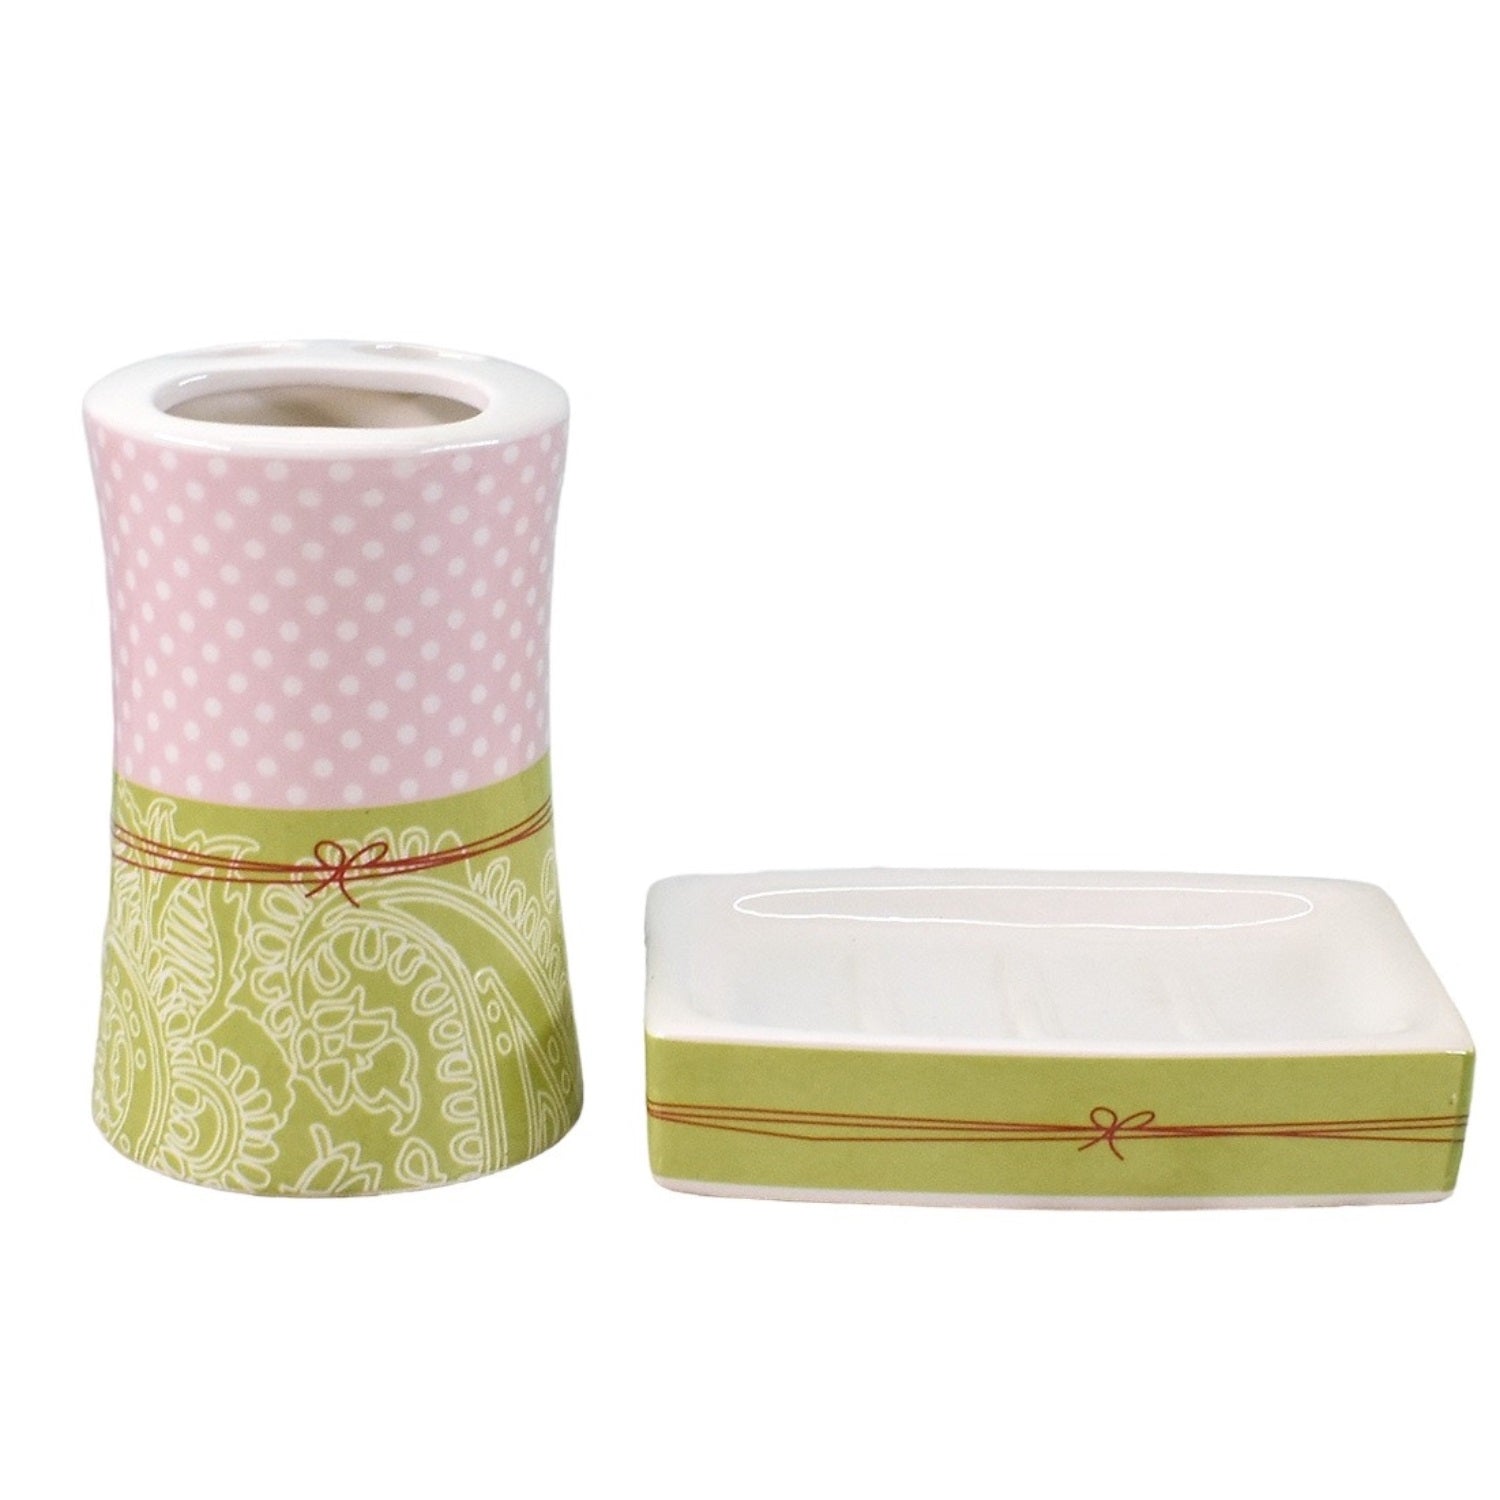 Ceramic Soap Dish Set with Toothbrush Holder, Set of 2 Bathroom Accessories for Home (C2044)